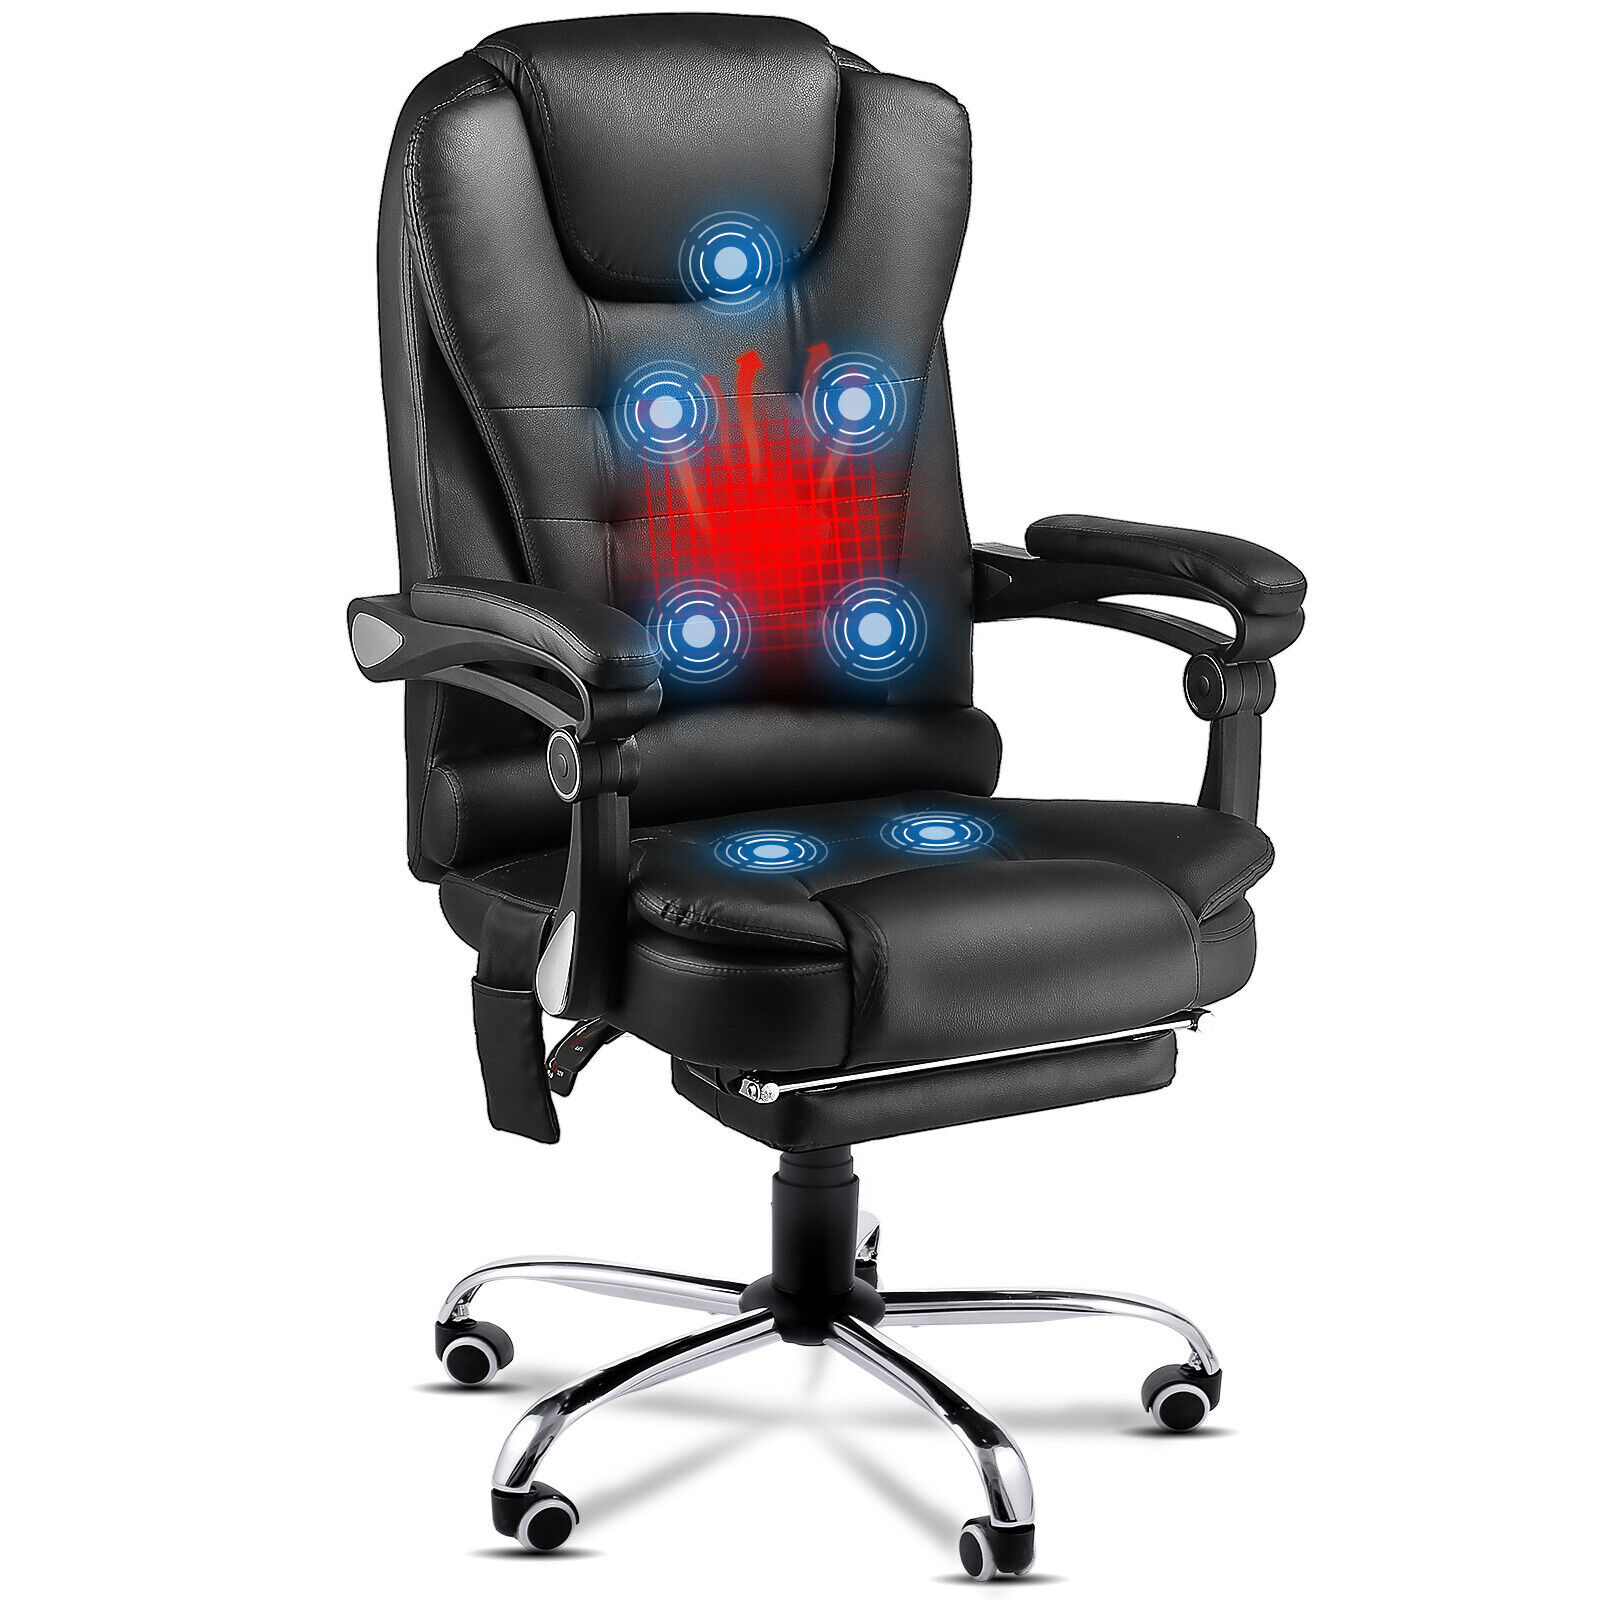 Heated Executive Office Chair W/Massage Desk Chair Leather Computre Chair Black